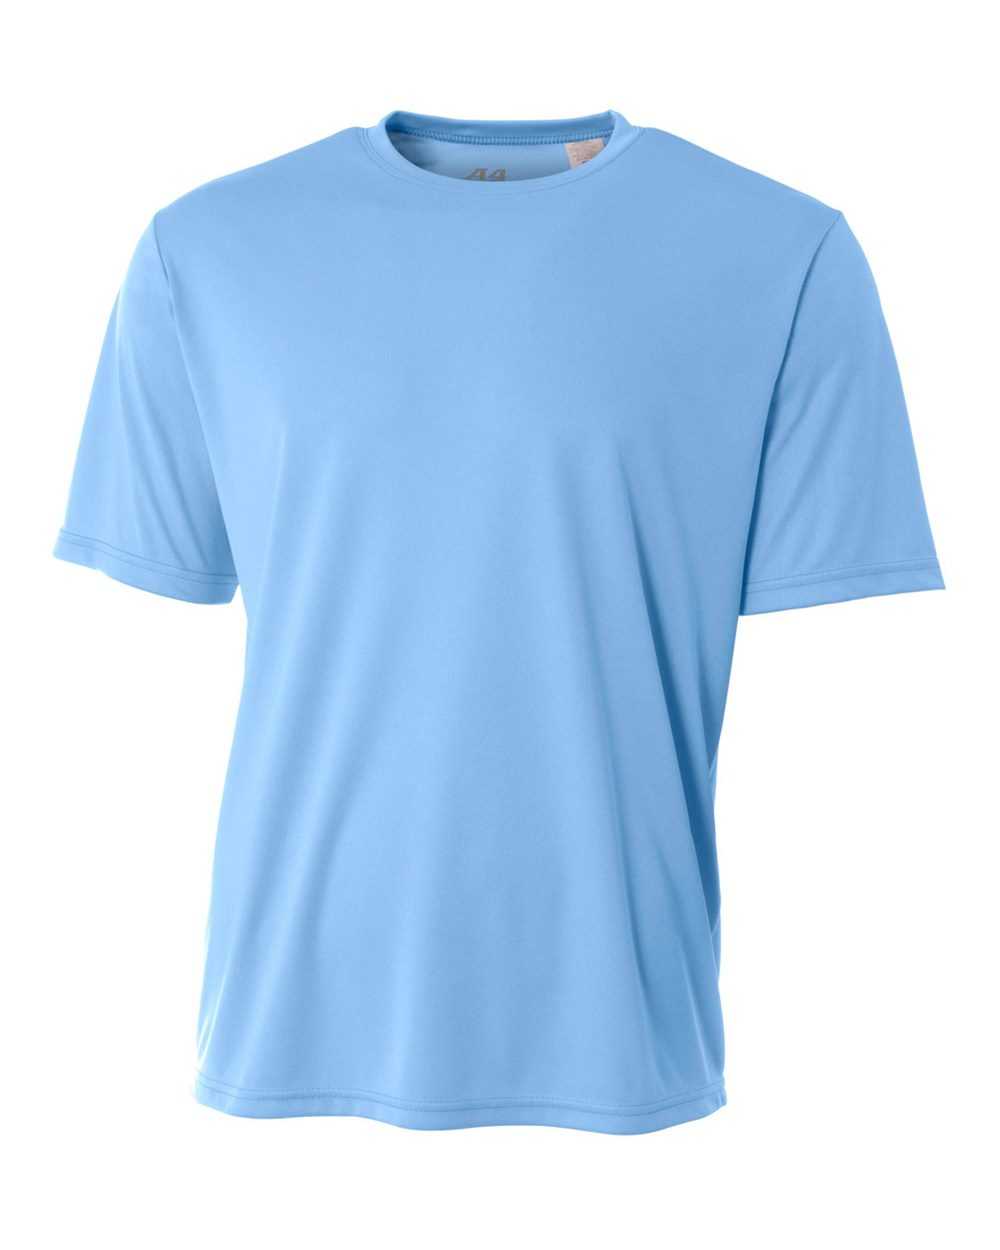 A4 N3142 Cooling Performance Crew - Light Blue - HIT a Double